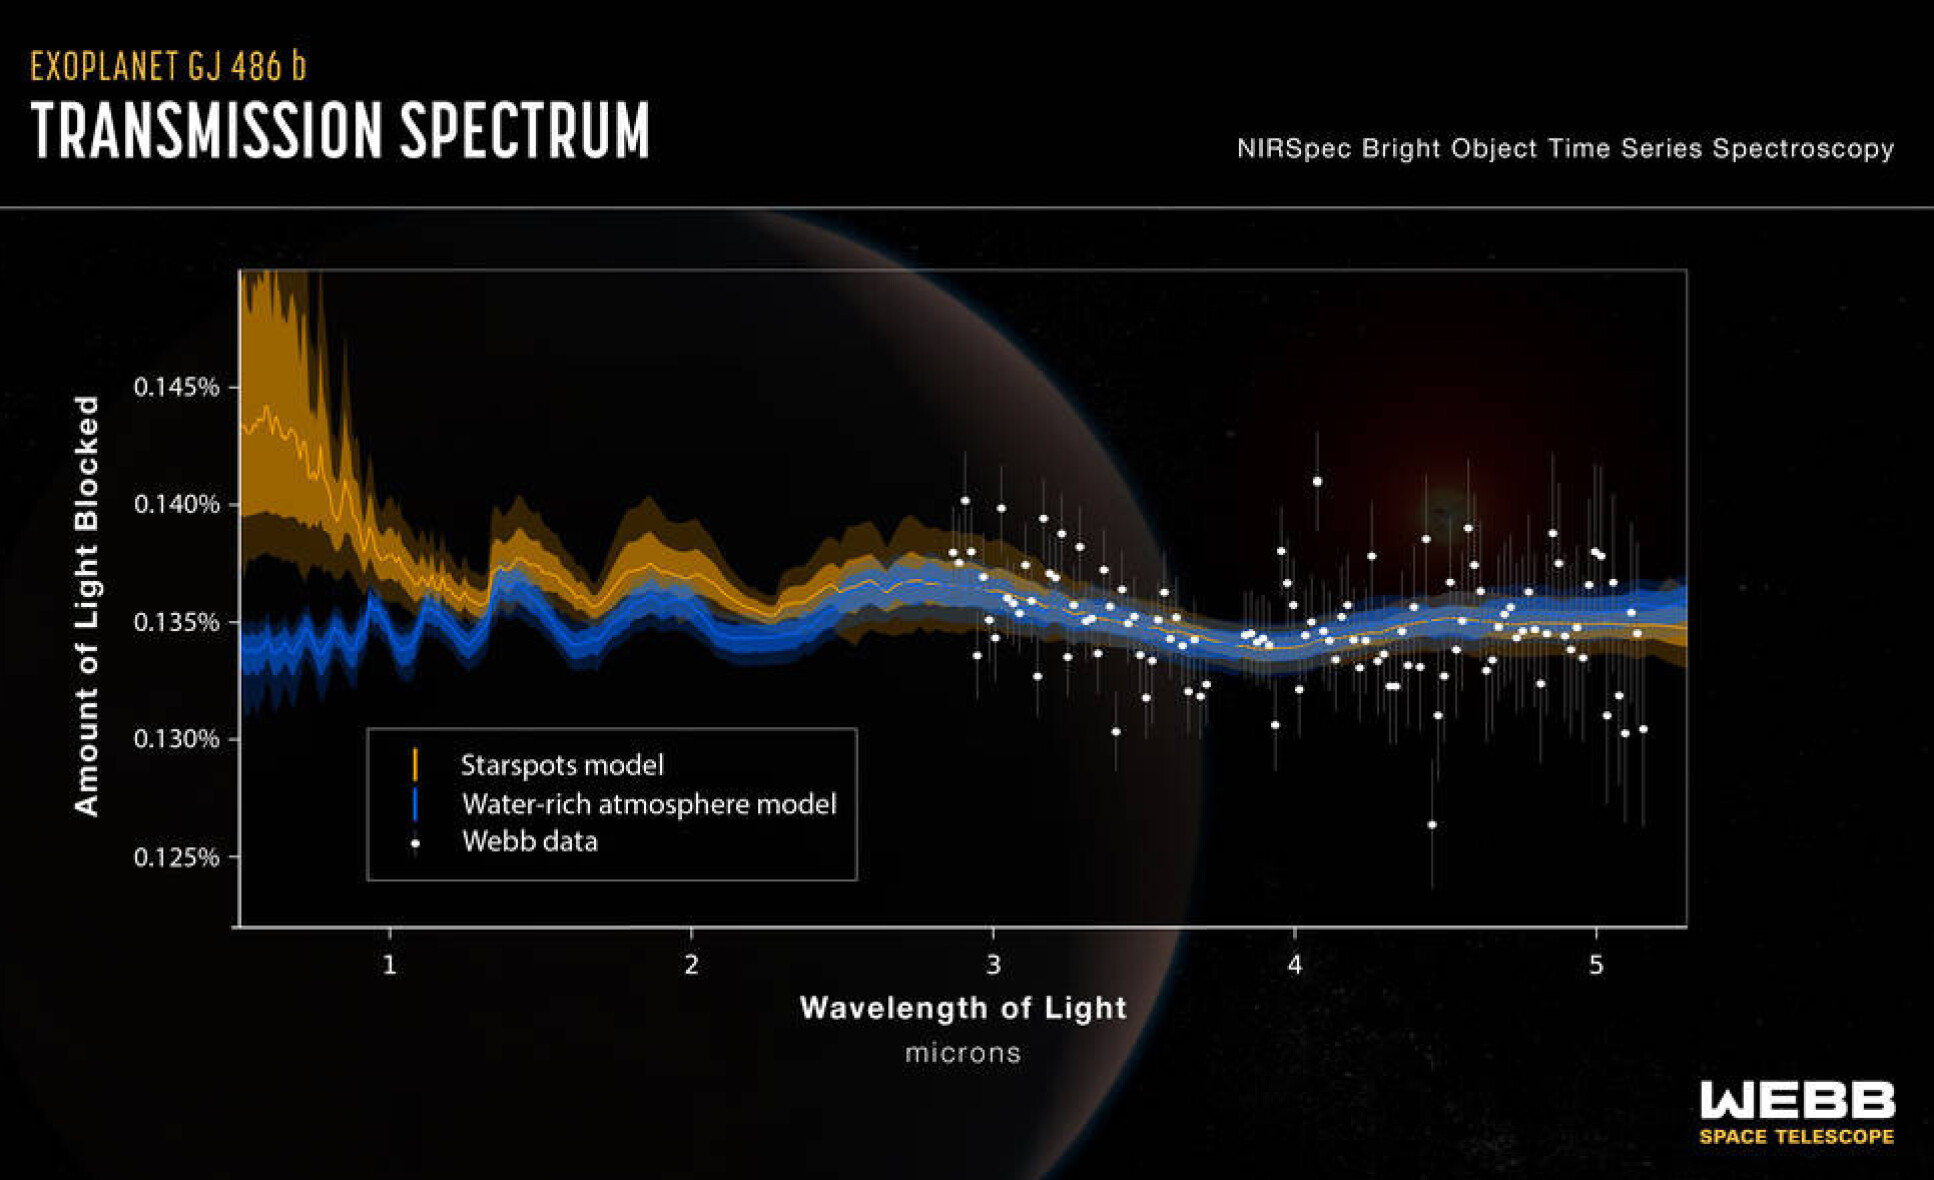 transmission spectrum obtained by Webb